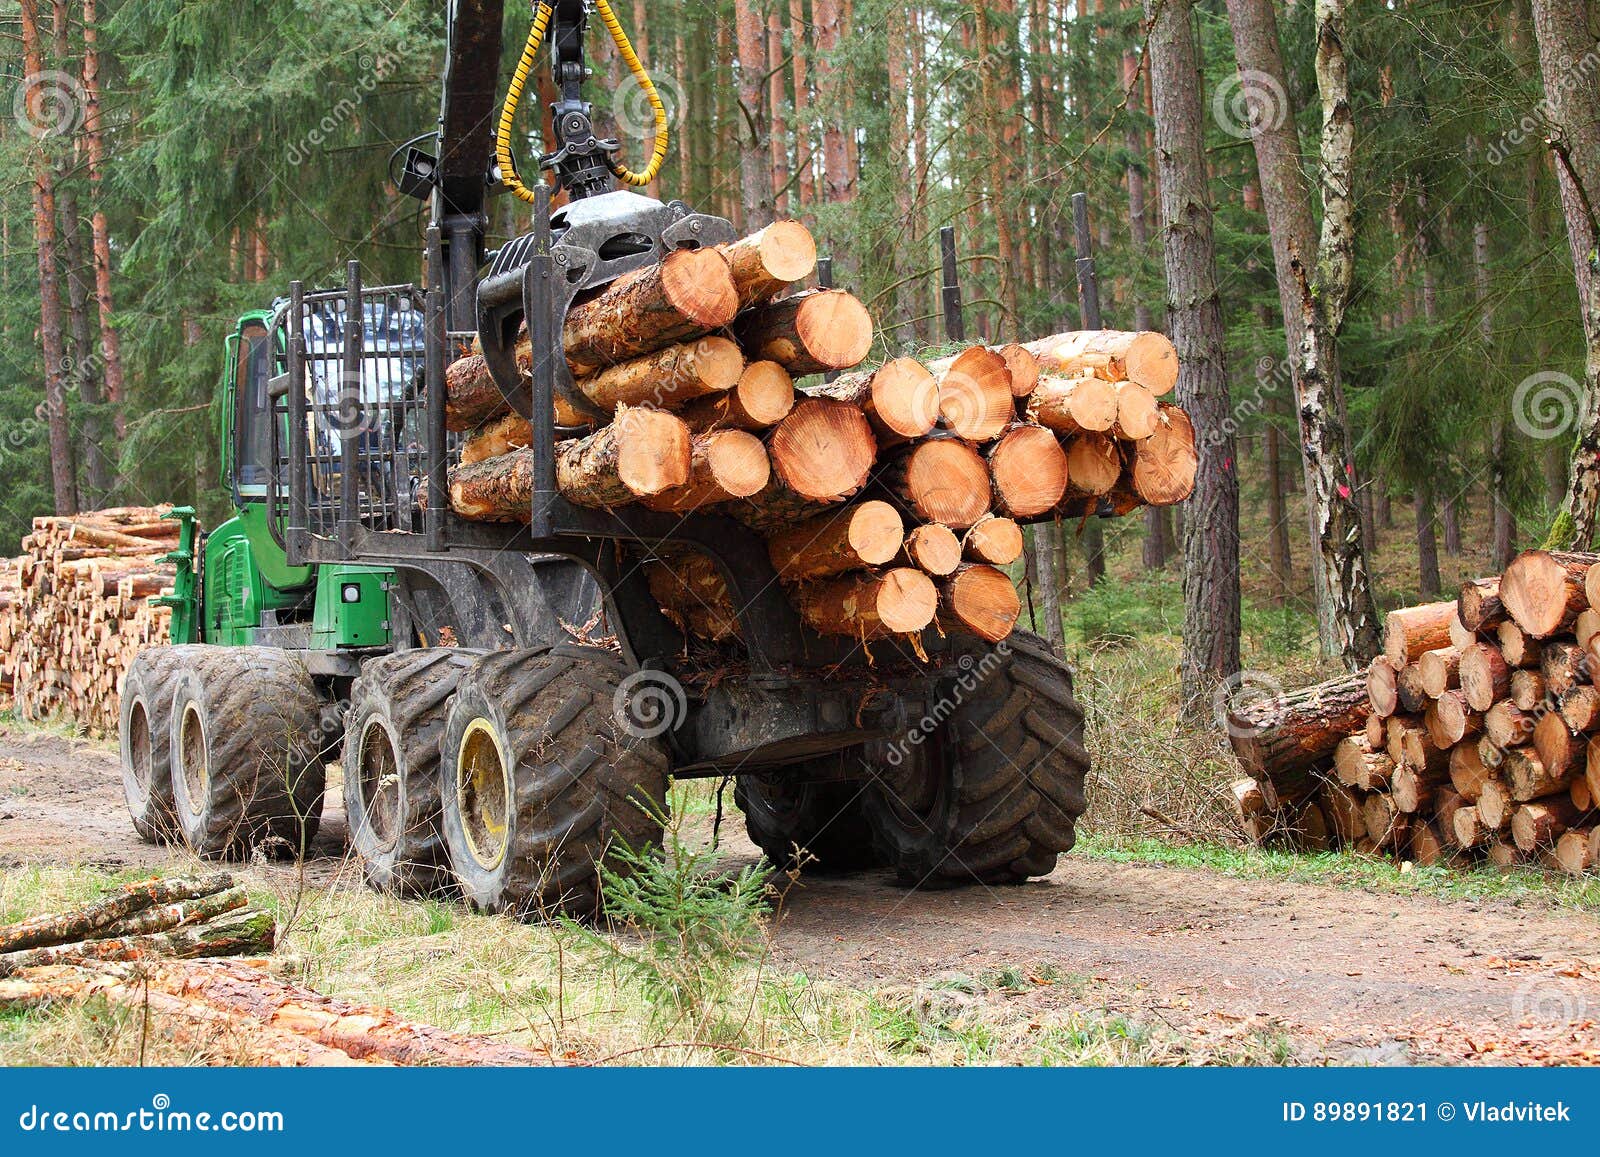 the harvester working in a forest.